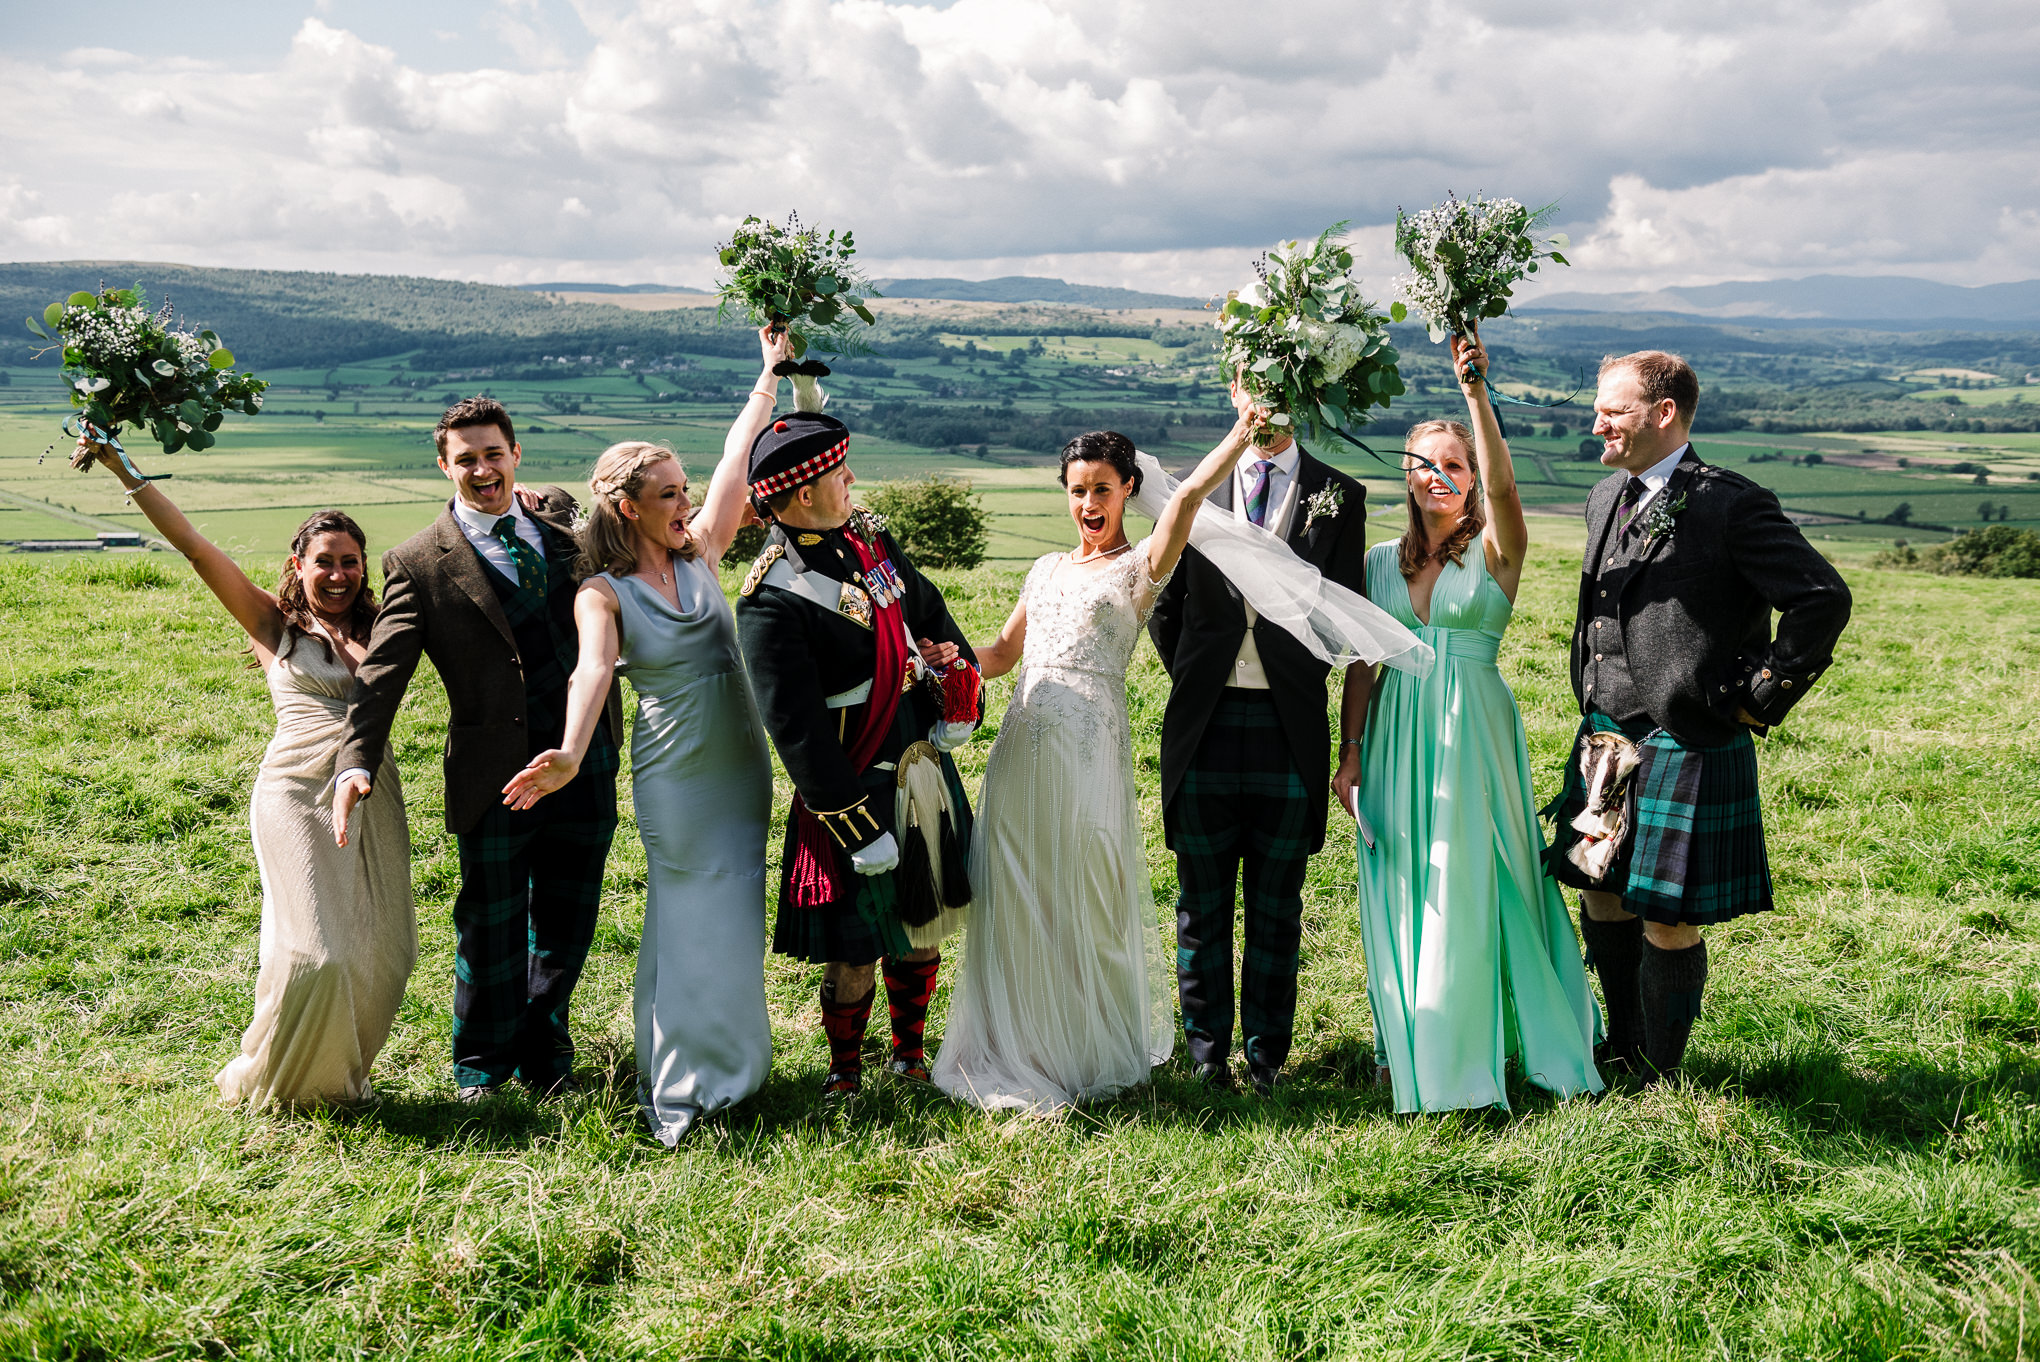 Bridal party with a view of the Lake district.